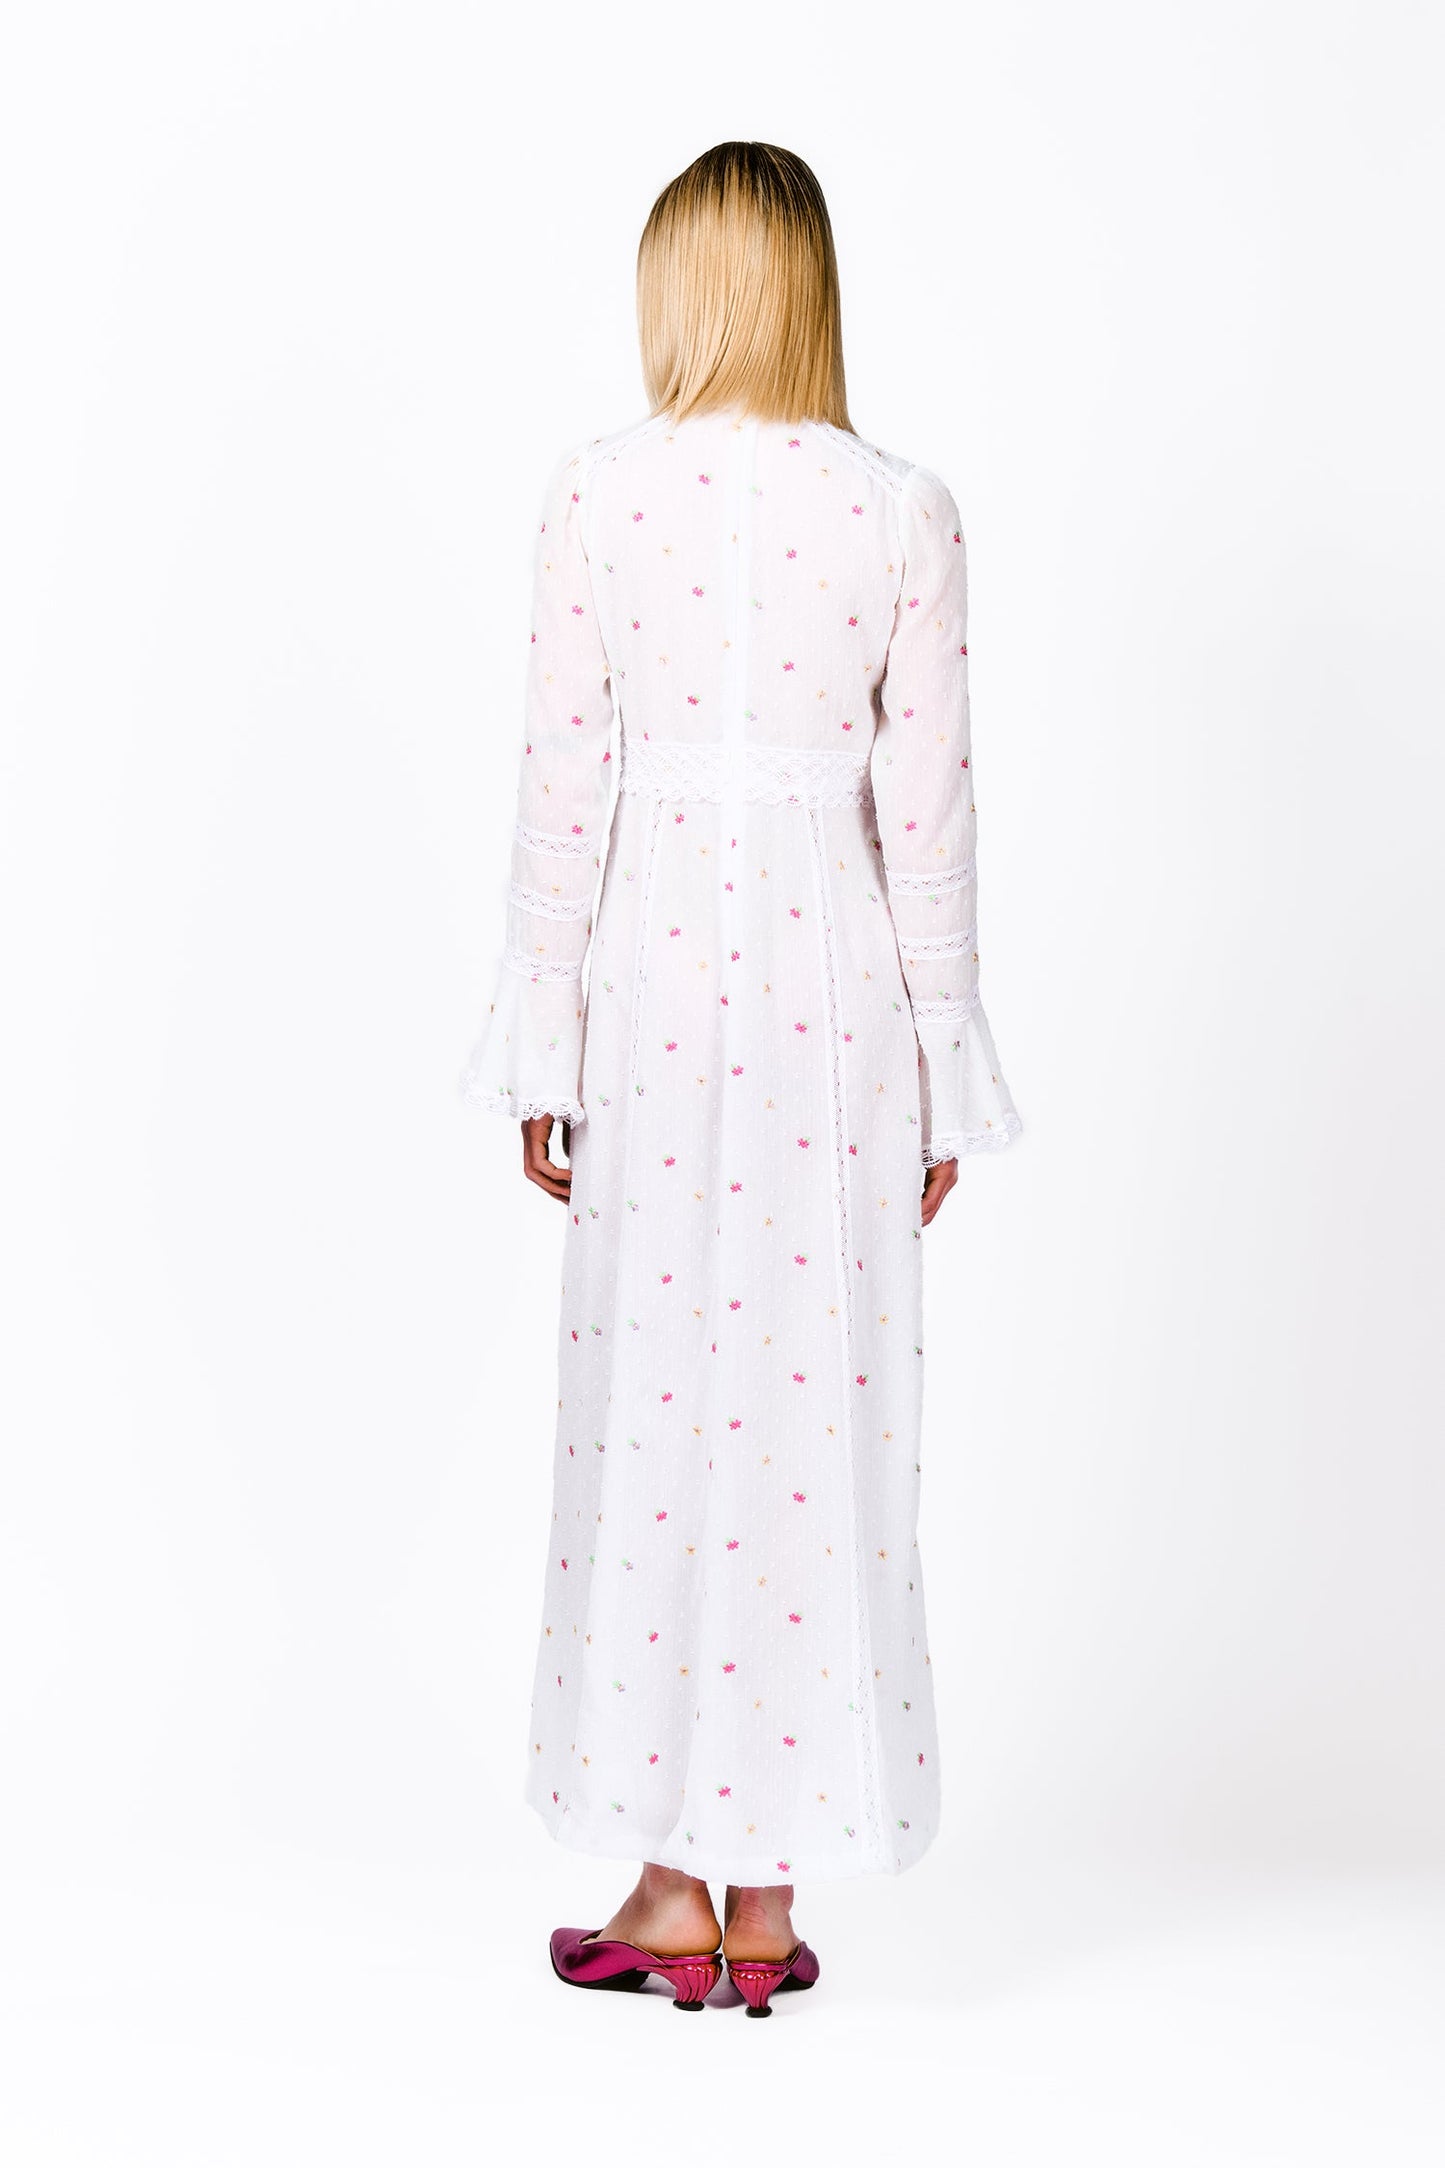 Cluny Lace Trimmed Floral Swiss Dot Maxi Dress, Mandarin laced collar, white with red dots